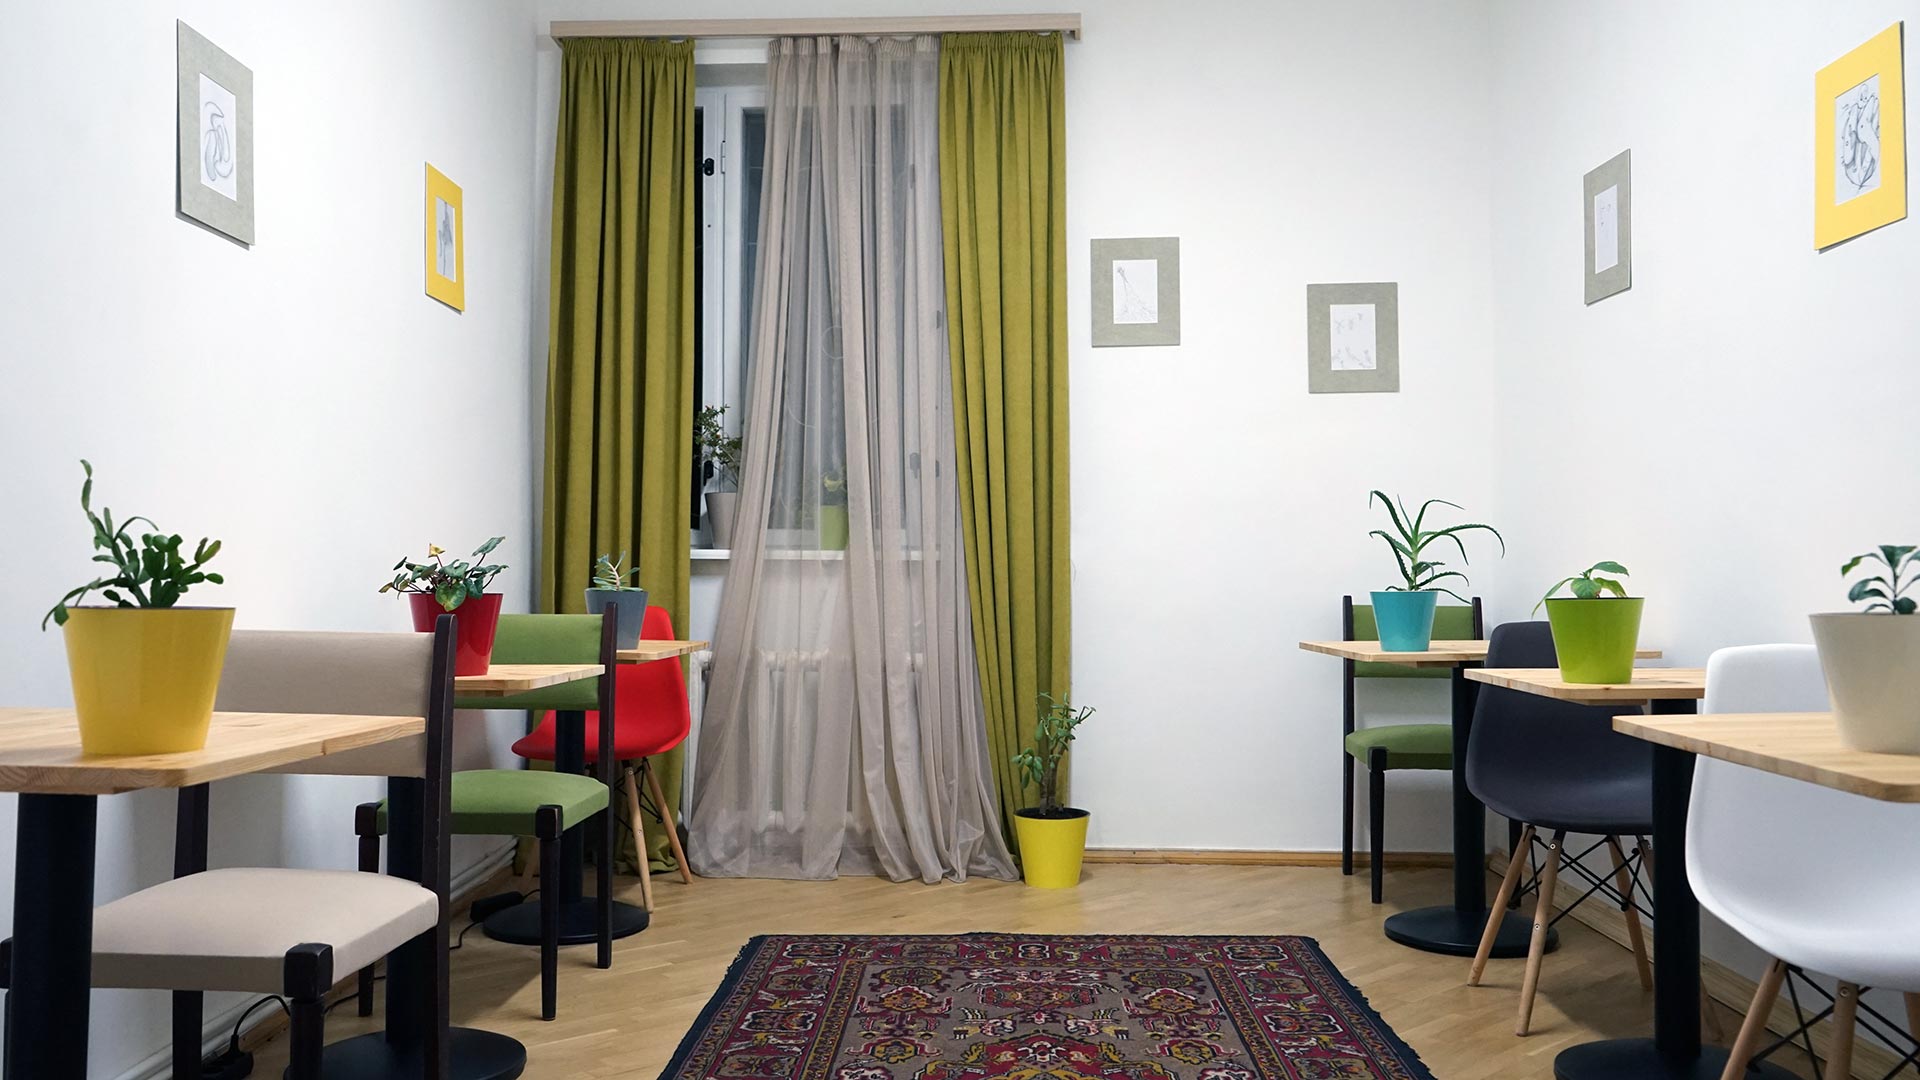 Are you downsizing your business? Consider Joining a Co-working Space! | Yerevan Coworking